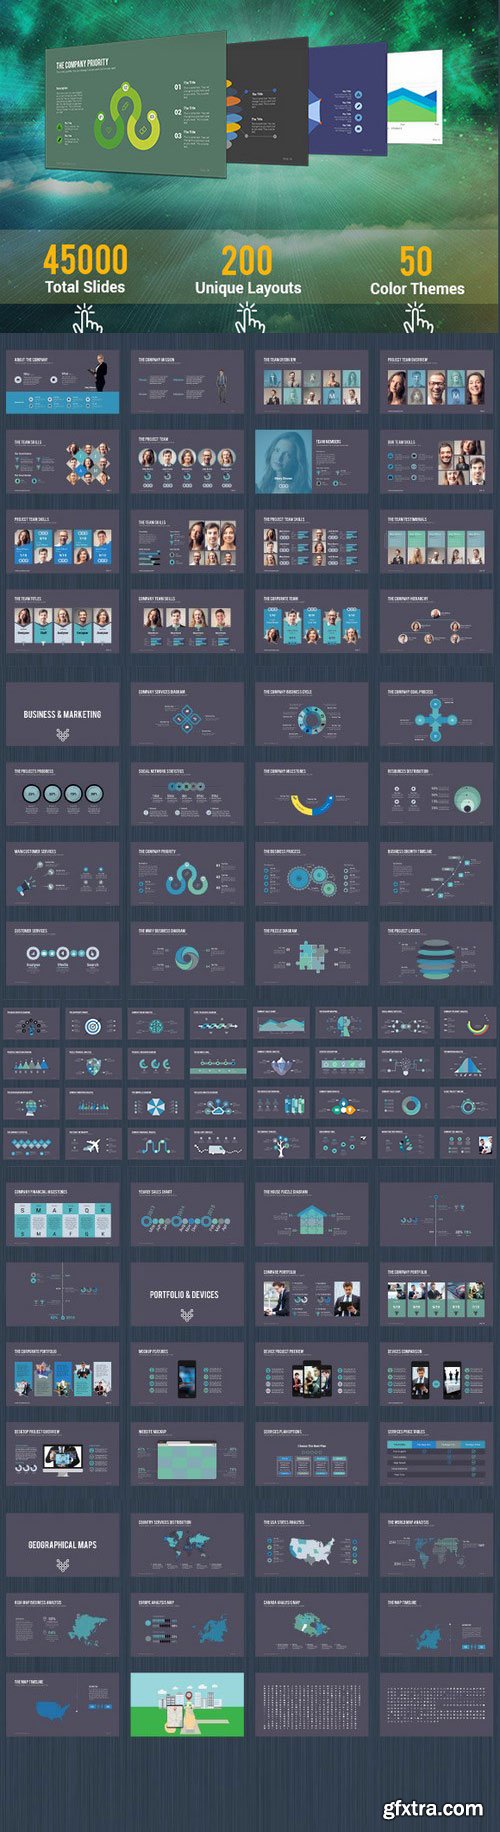 CM - Great Business PowerPoint Template 737797